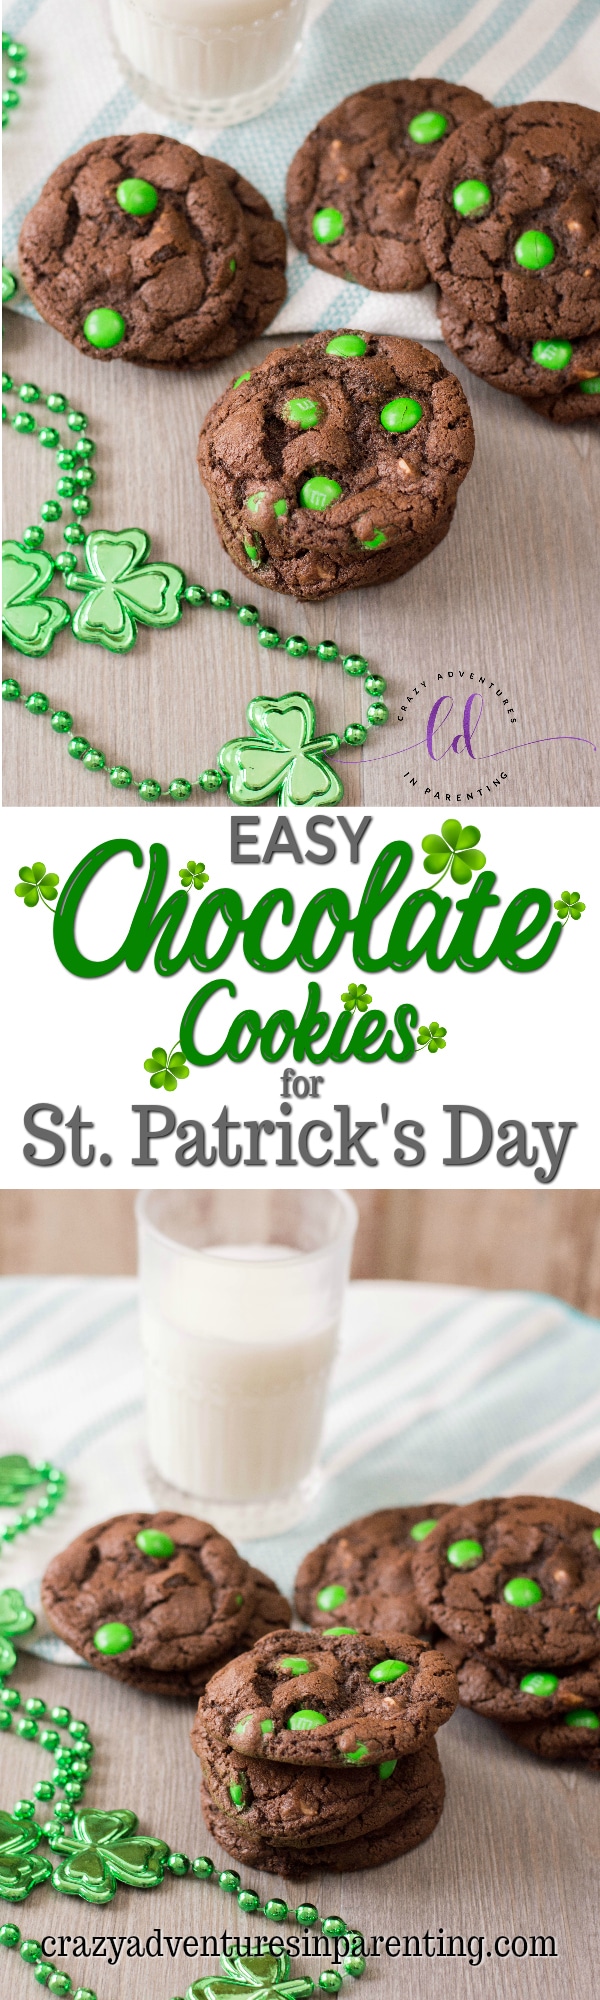 Easy Chocolate Cookies for St Patrick's Day